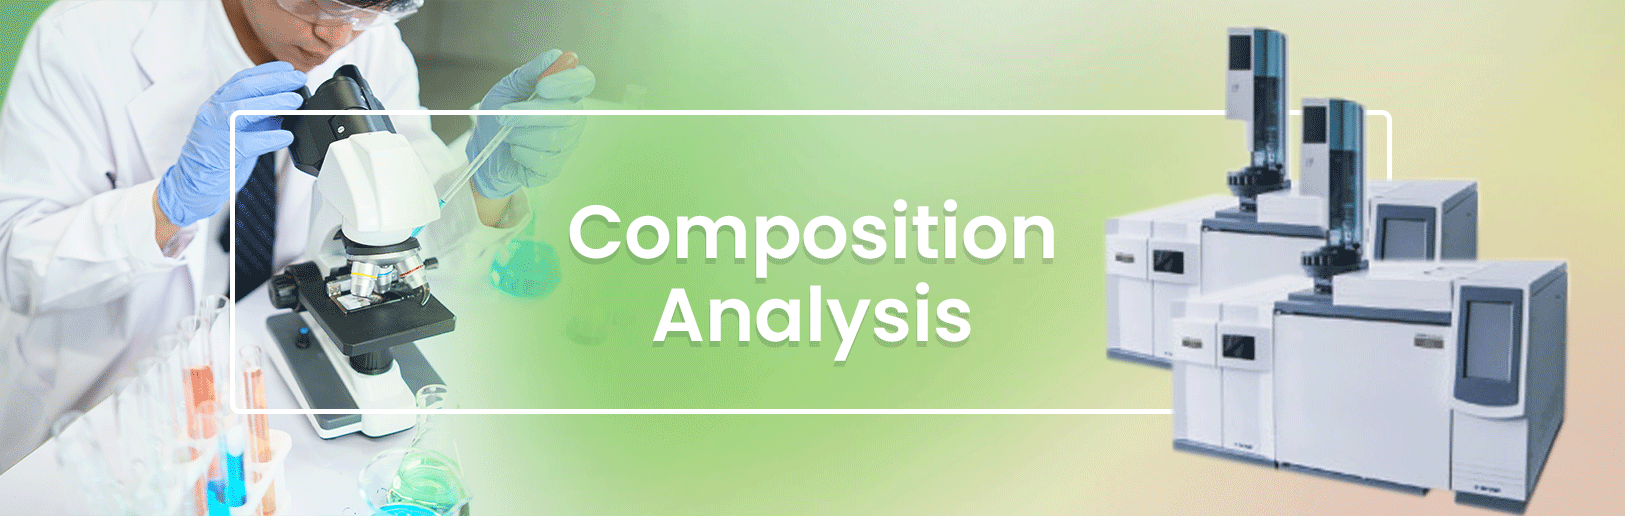 Substance Composition Analysis﻿